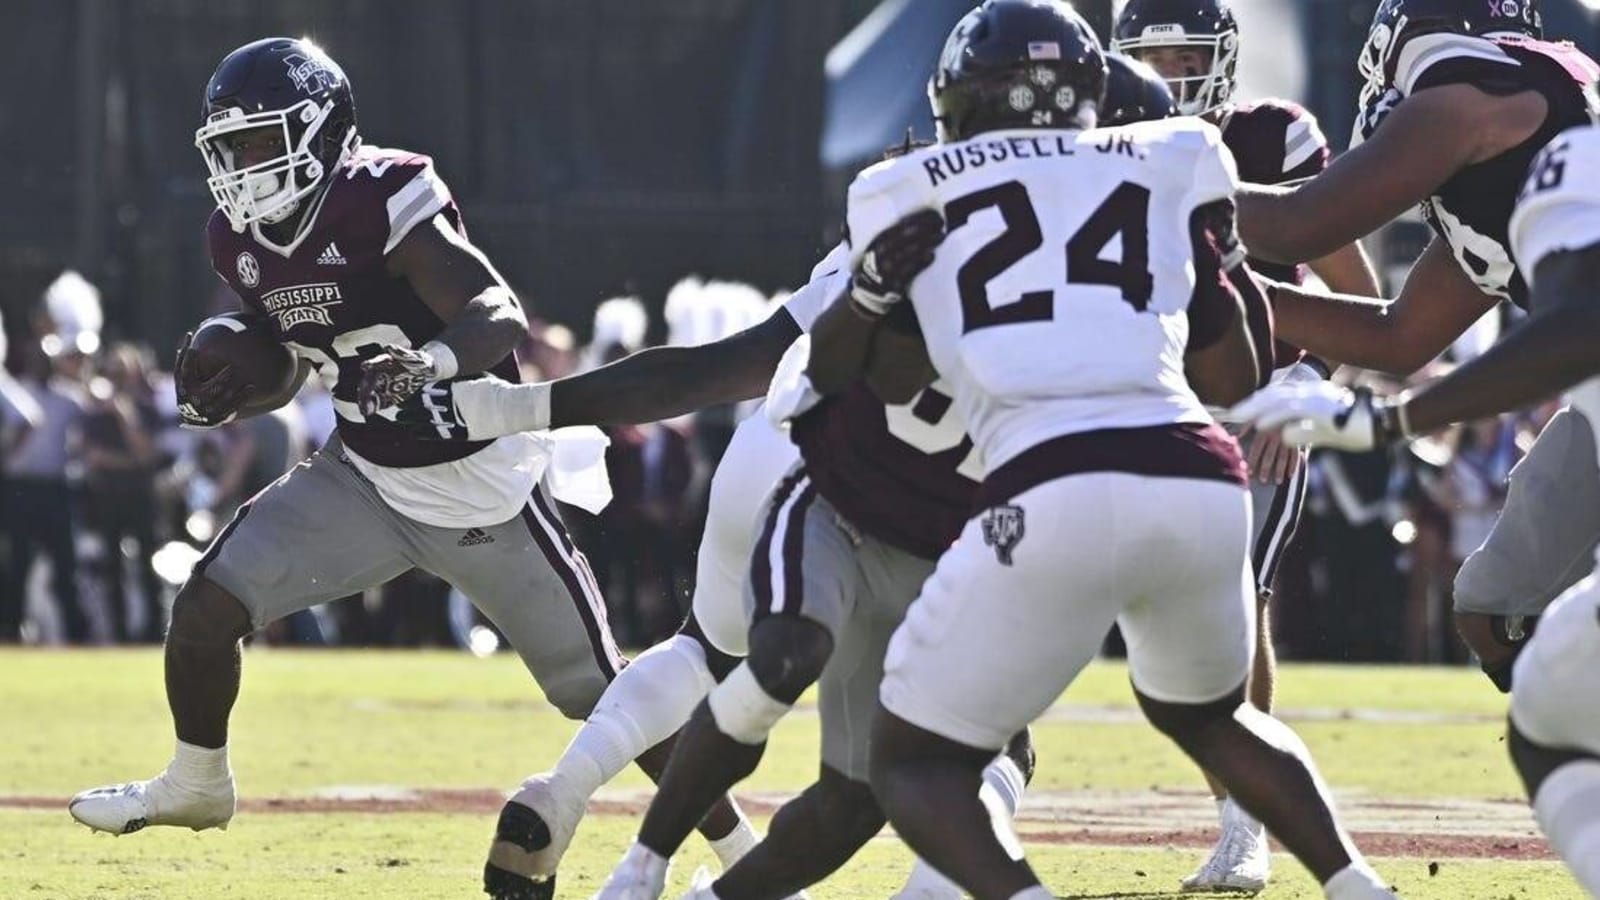 Will Rogers leads Mississippi St. past Texas A&M